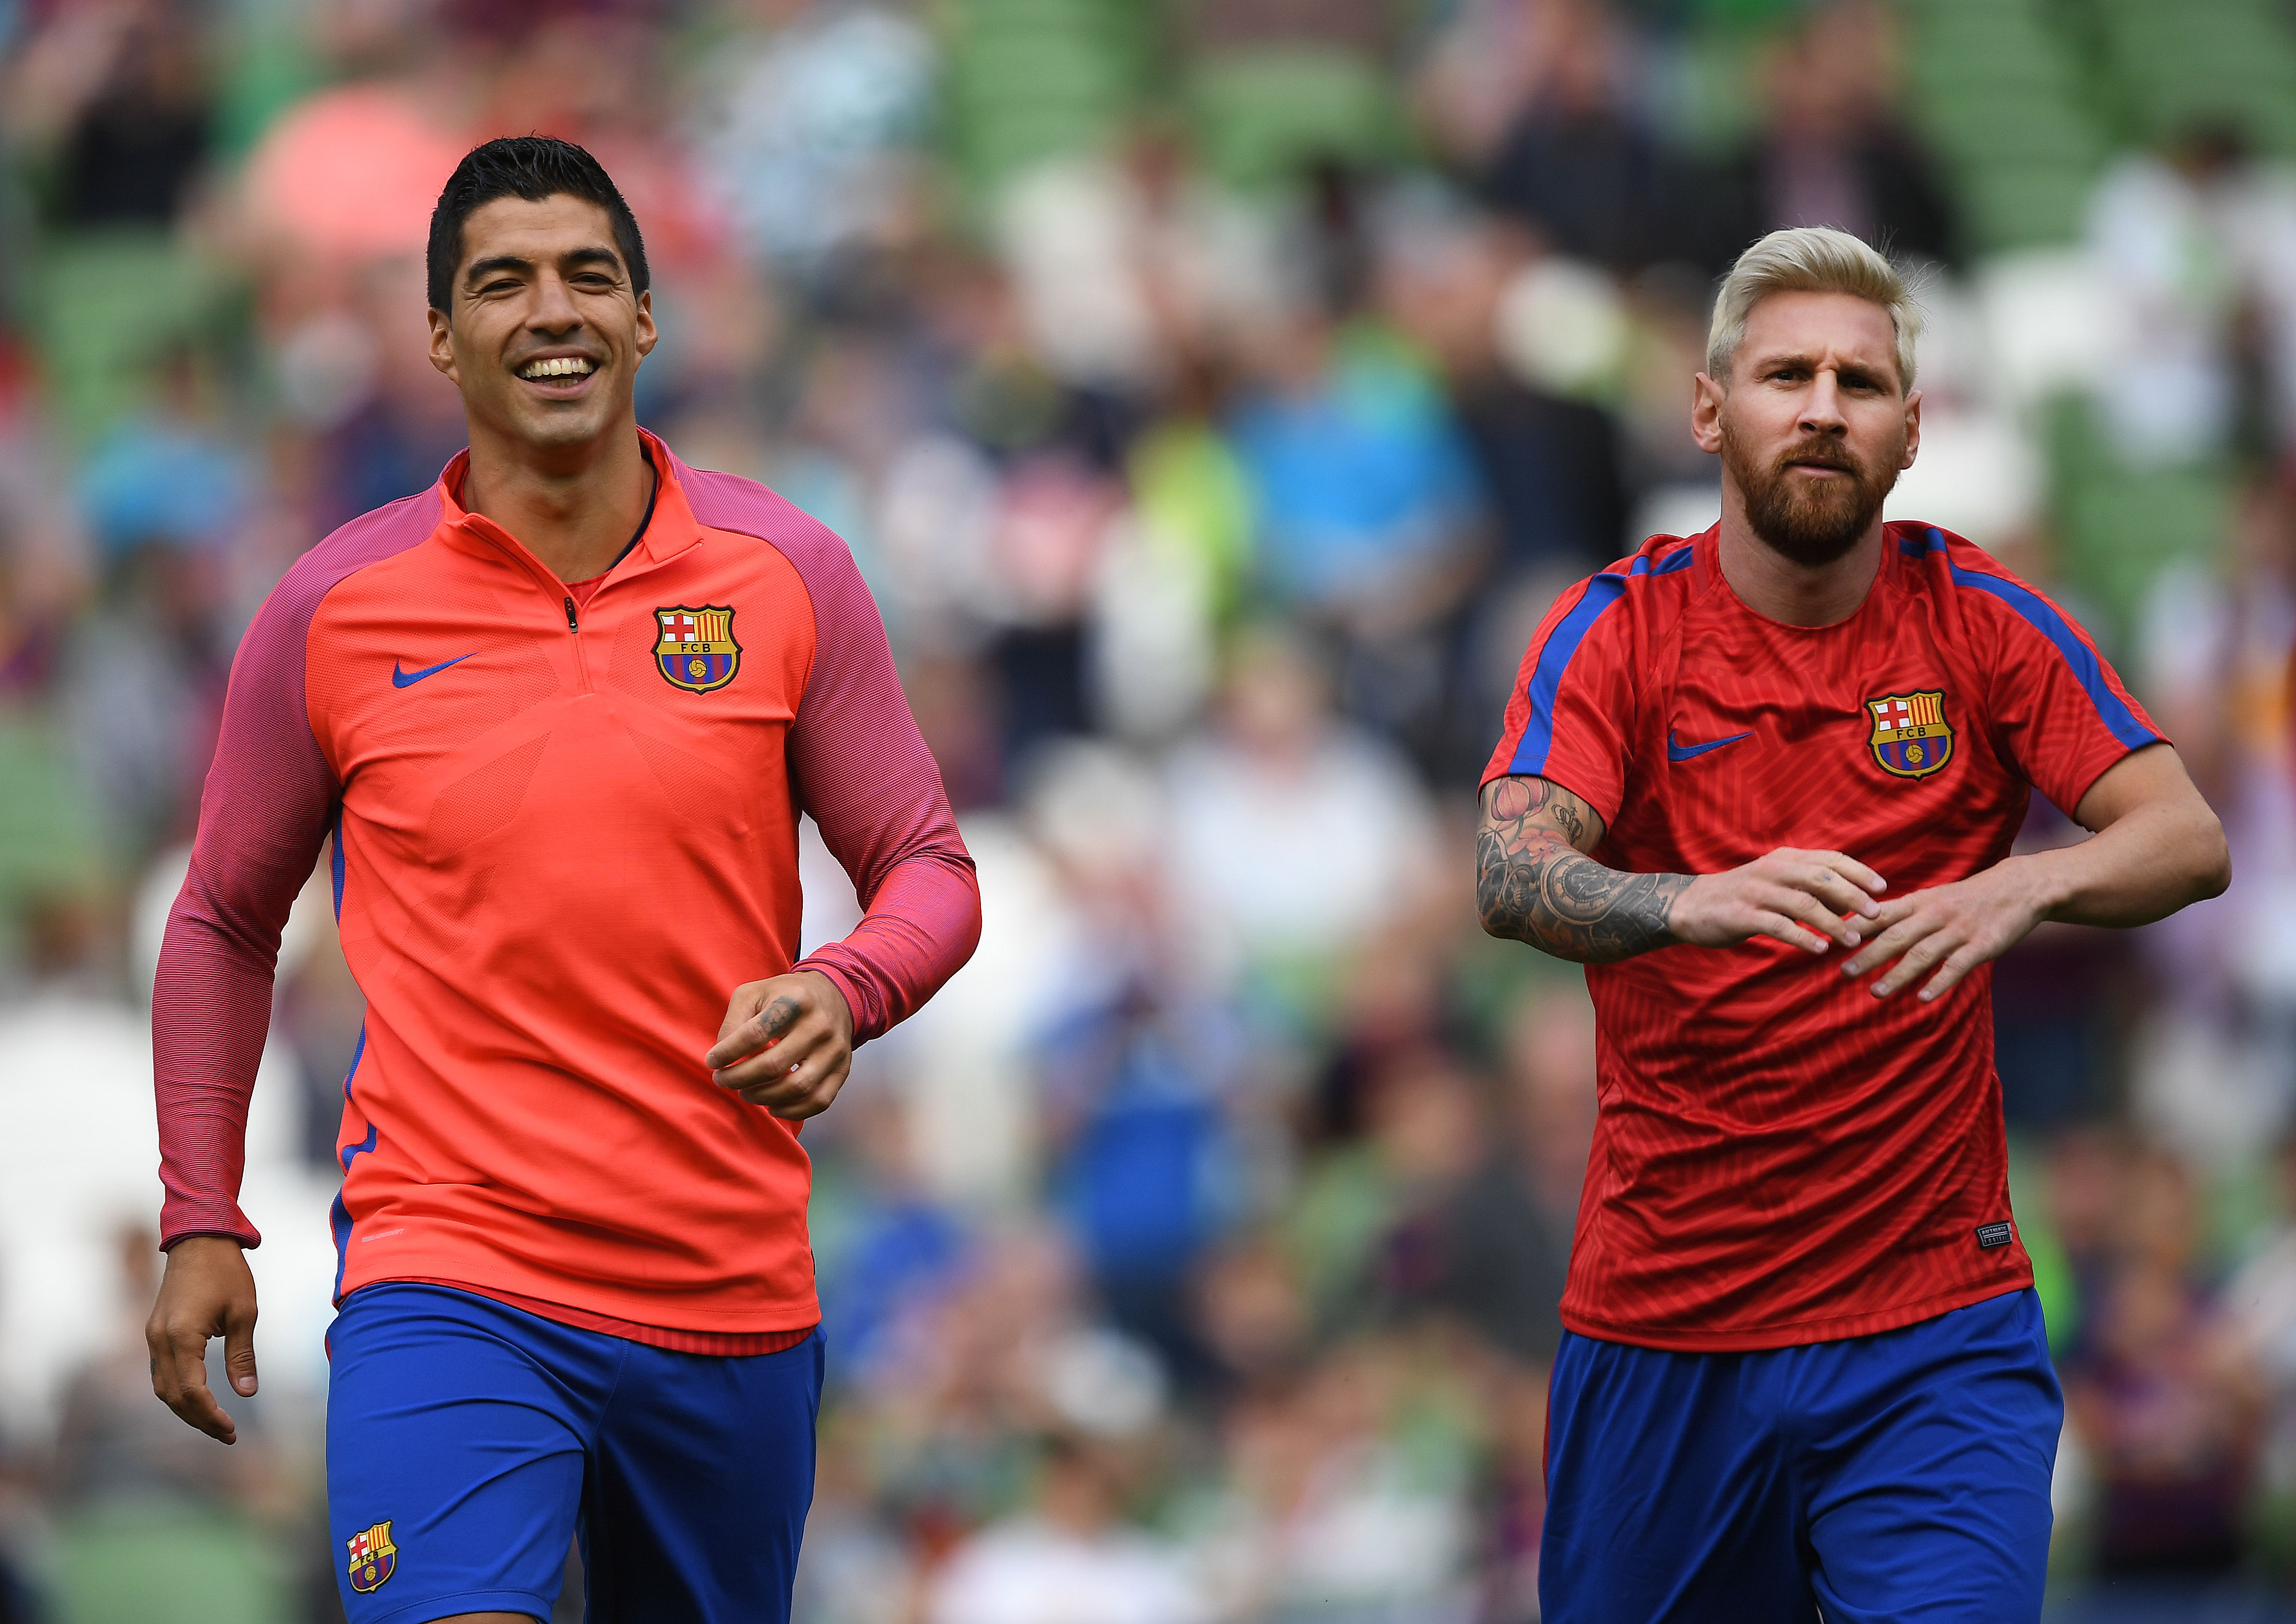 DUBLIN, IRELAND - JULY 30: Lionel Messi (R) and Luis Suarez (L) of Barcelona before the International Champions Cup series match between Barcelona and Celtic at Aviva Stadium on July 30, 2016 in Dublin, Ireland. (Photo by Charles McQuillan/Getty Images)